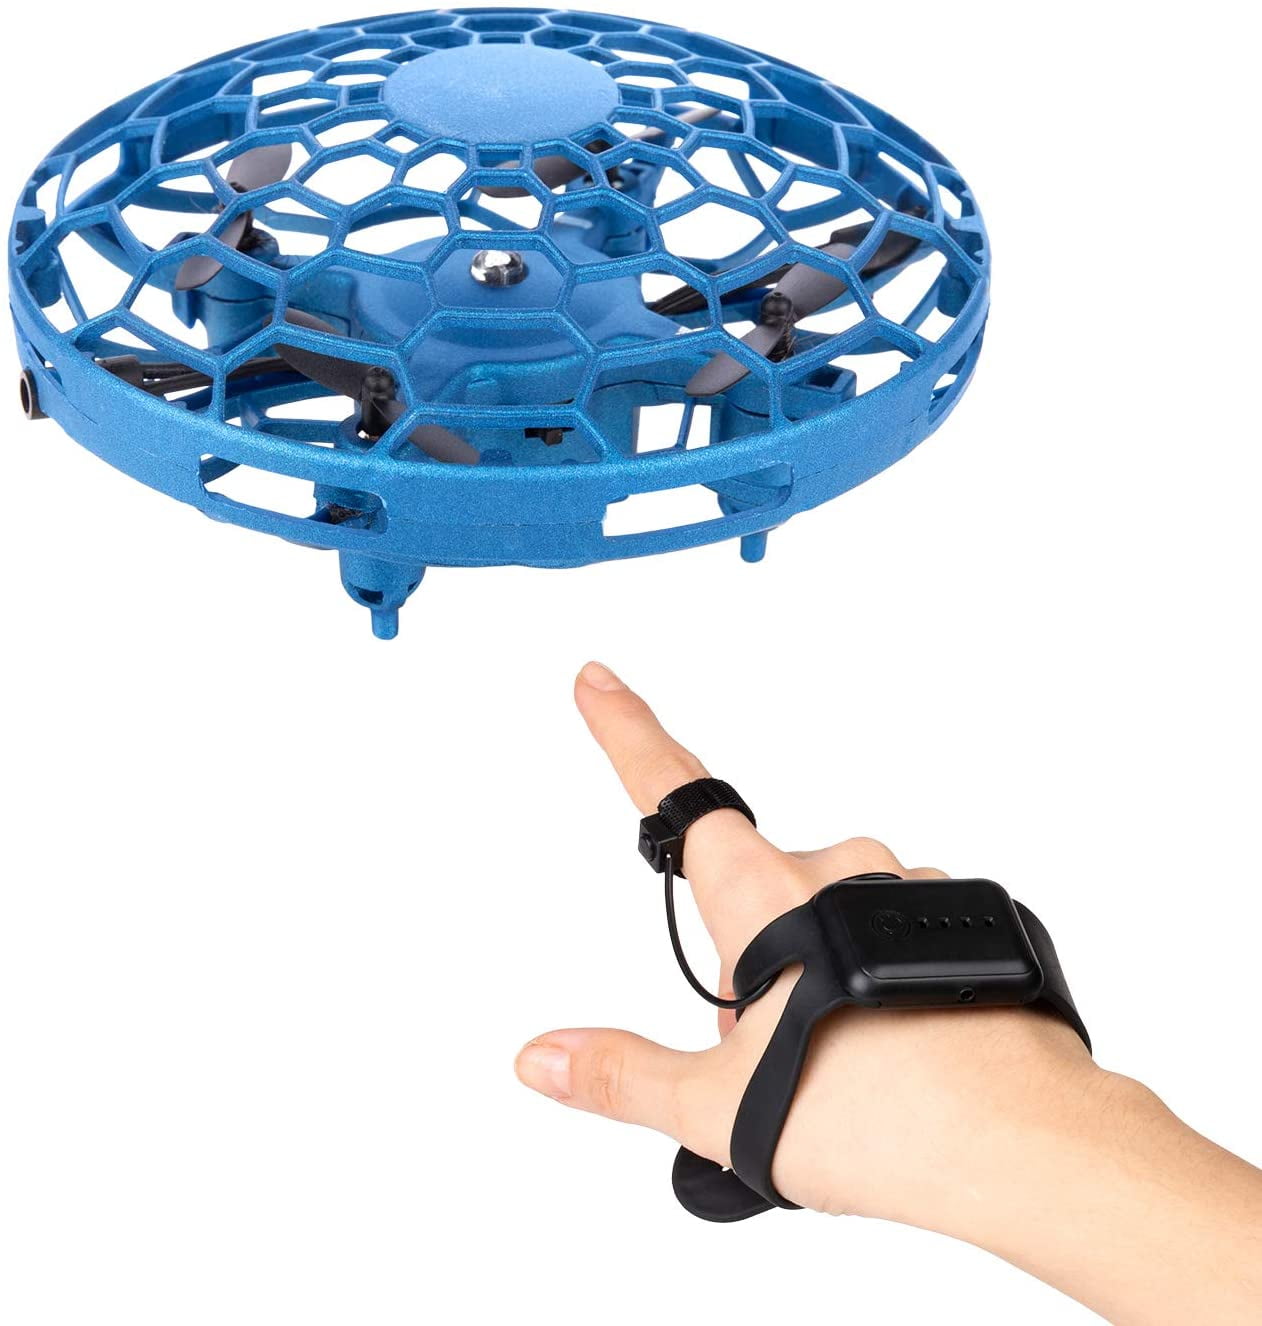 Canopus Drone Wrist Watch Remote Control, Gesture UFO-Type Mini Drone with USB Cable, LED Blue - Walmart.com